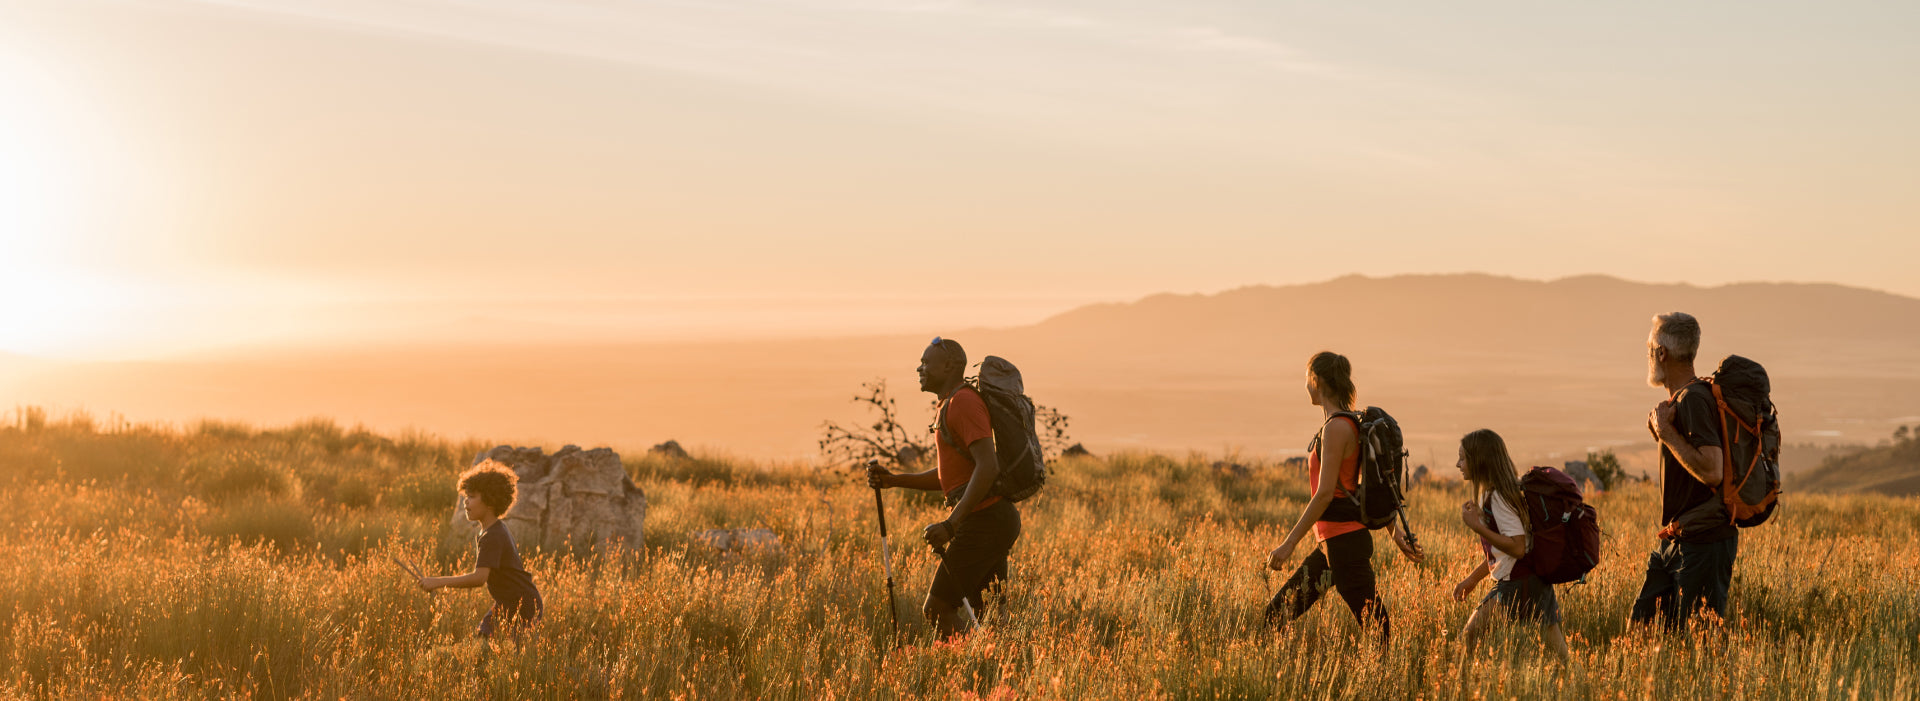 A group of 5 hiking during golden hour among tall grass